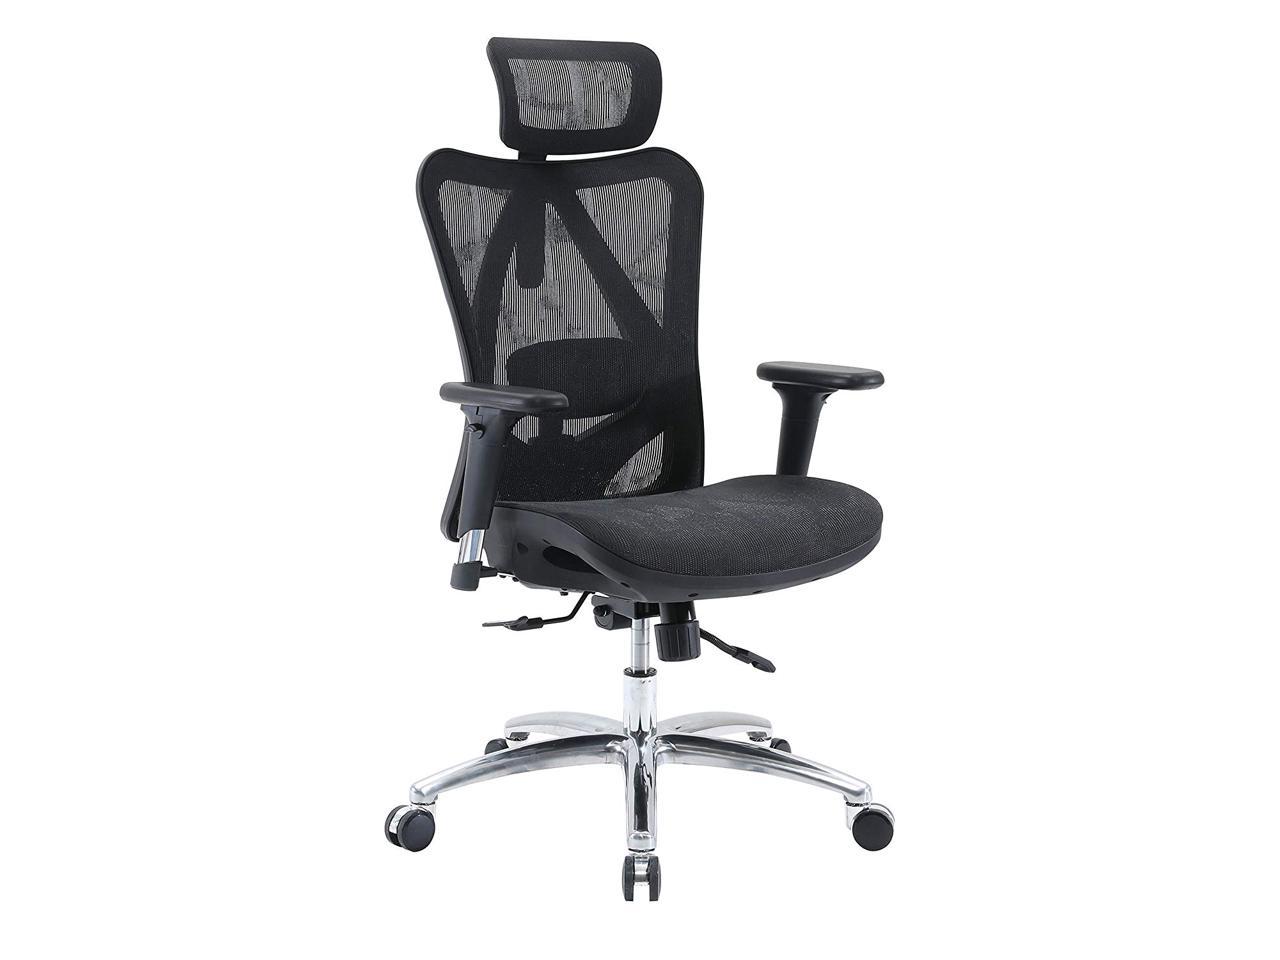 Home Breathable Office Chair Office Chair Ergonomic Desk Chair Computer Chair with Adjustable Lumbar Support and Headrest Black Swivel Executive Mesh Office Chair with Quiet Pulley Wheels